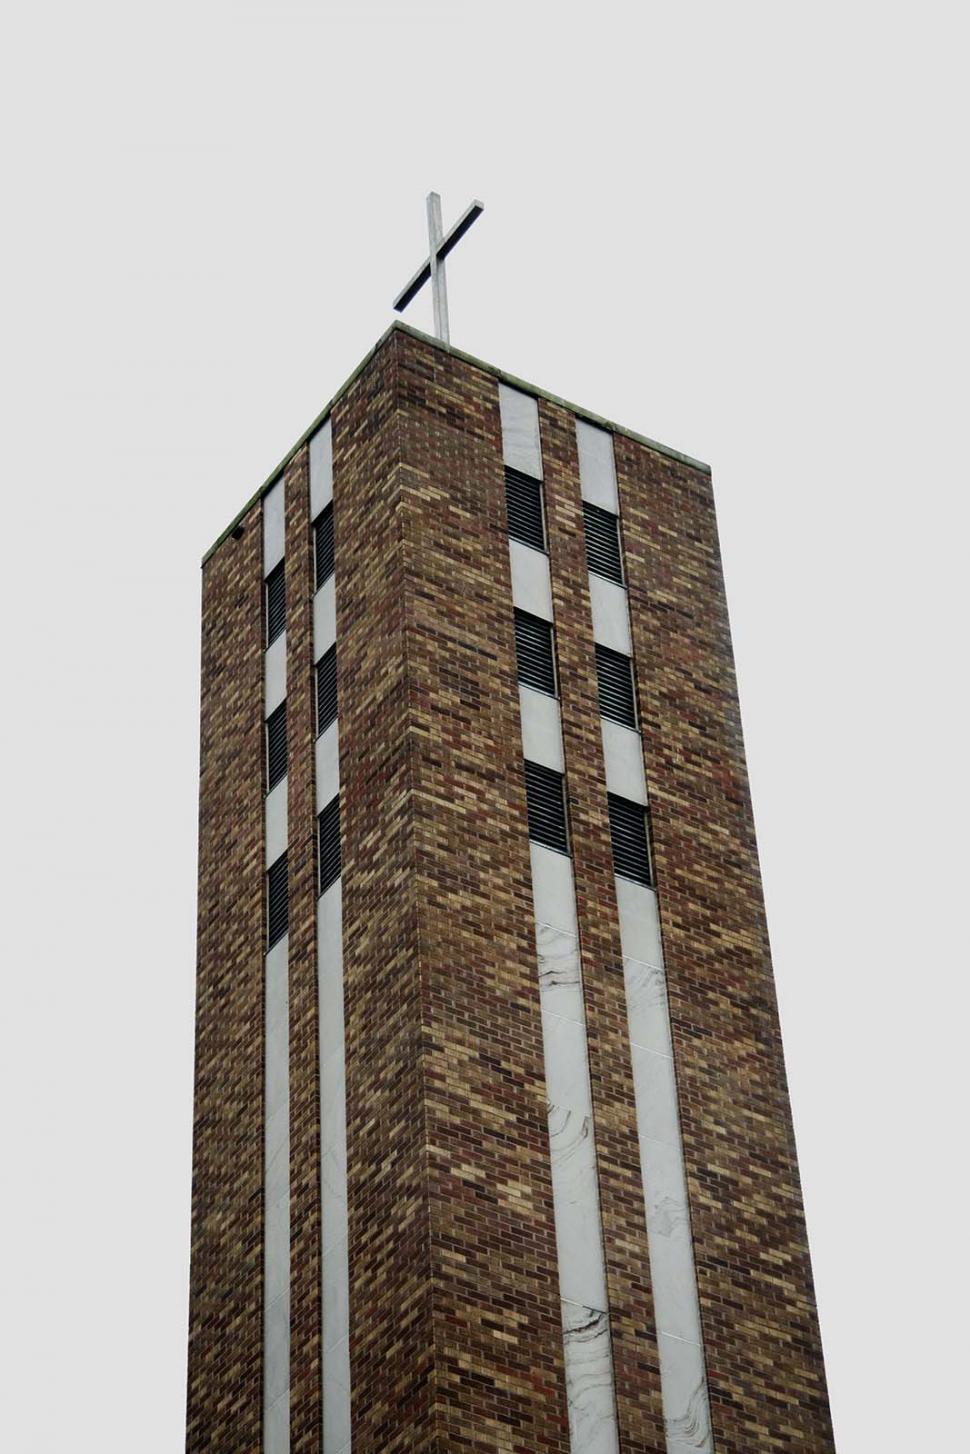 Free Image of Tall Building With Cross on Top 